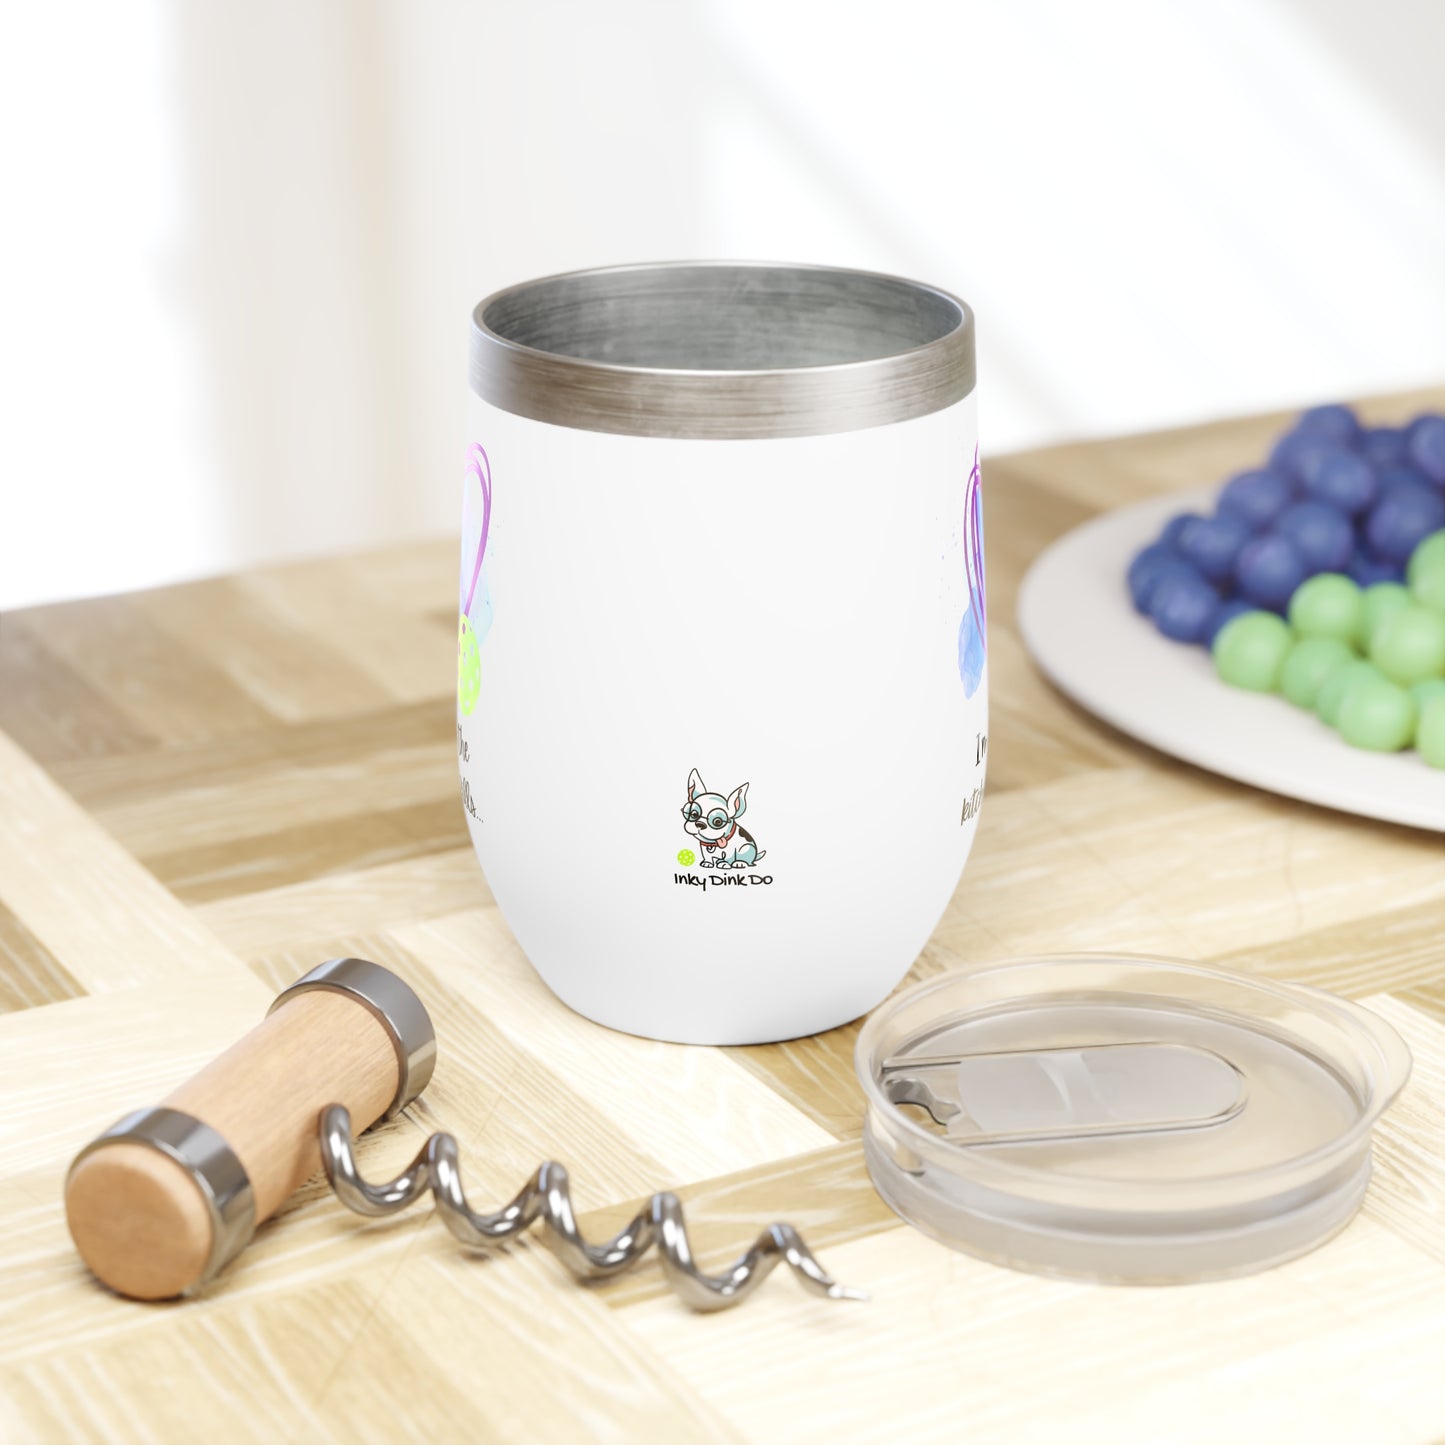 Chill Wine Tumbler In kitchen for refills